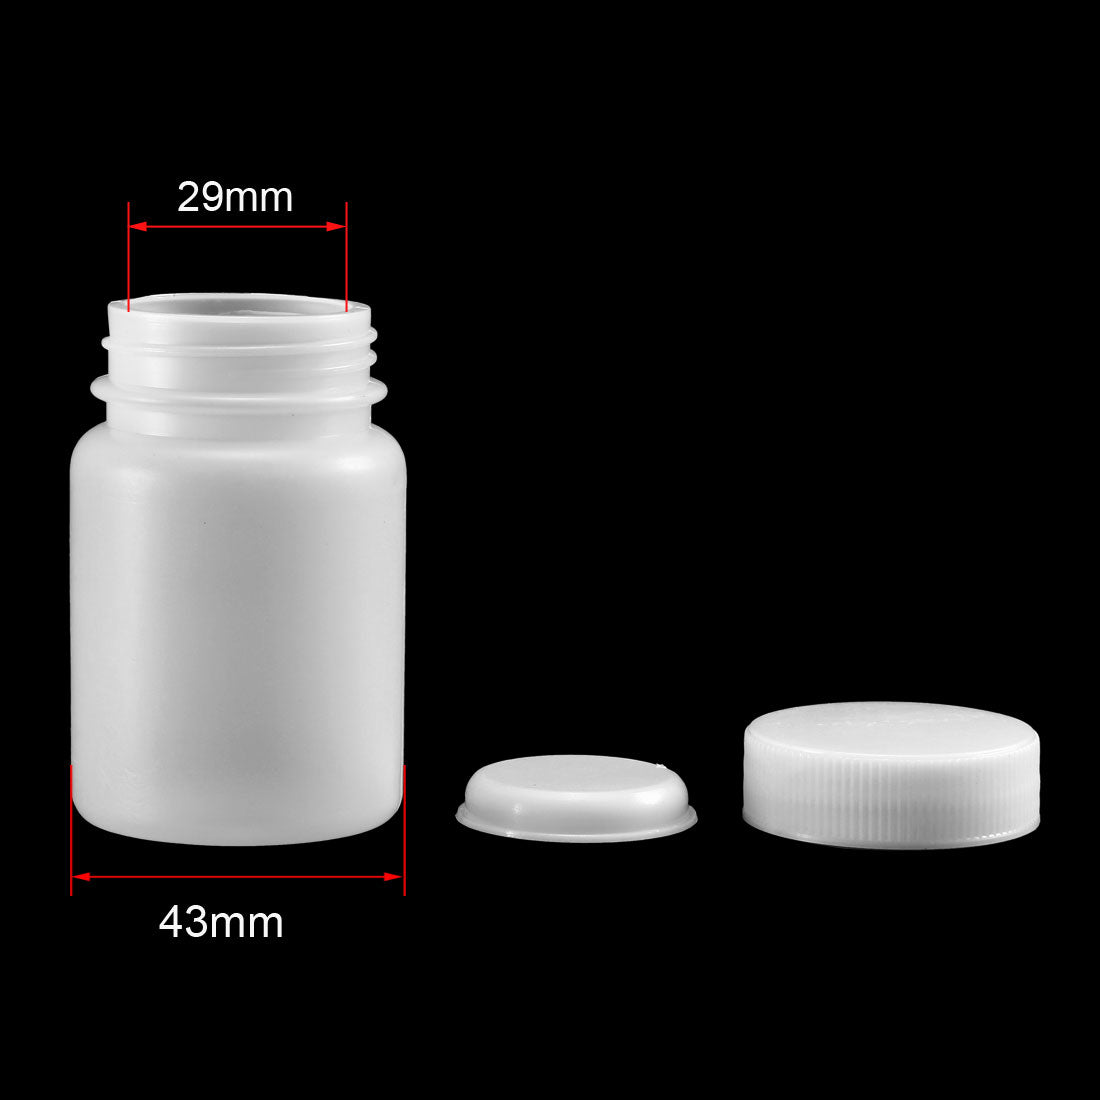 Uxcell Uxcell Plastic Lab Chemical Reagent Bottle 500ml/16.9oz Wide Mouth Sample Sealing Liquid Storage Container 2pcs